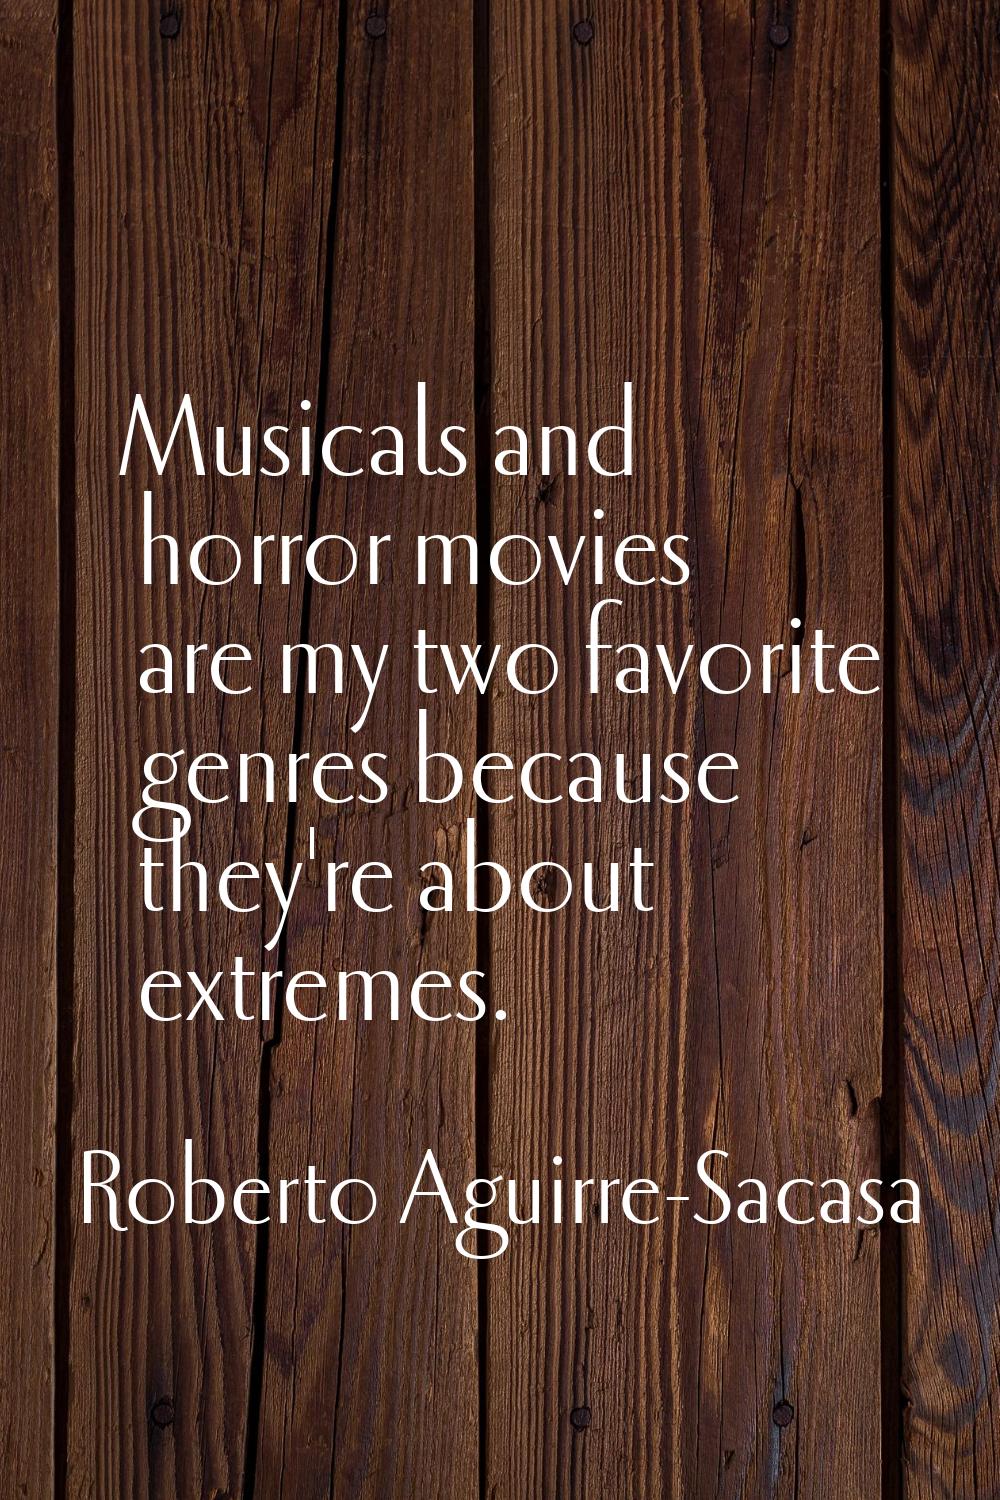 Musicals and horror movies are my two favorite genres because they're about extremes.